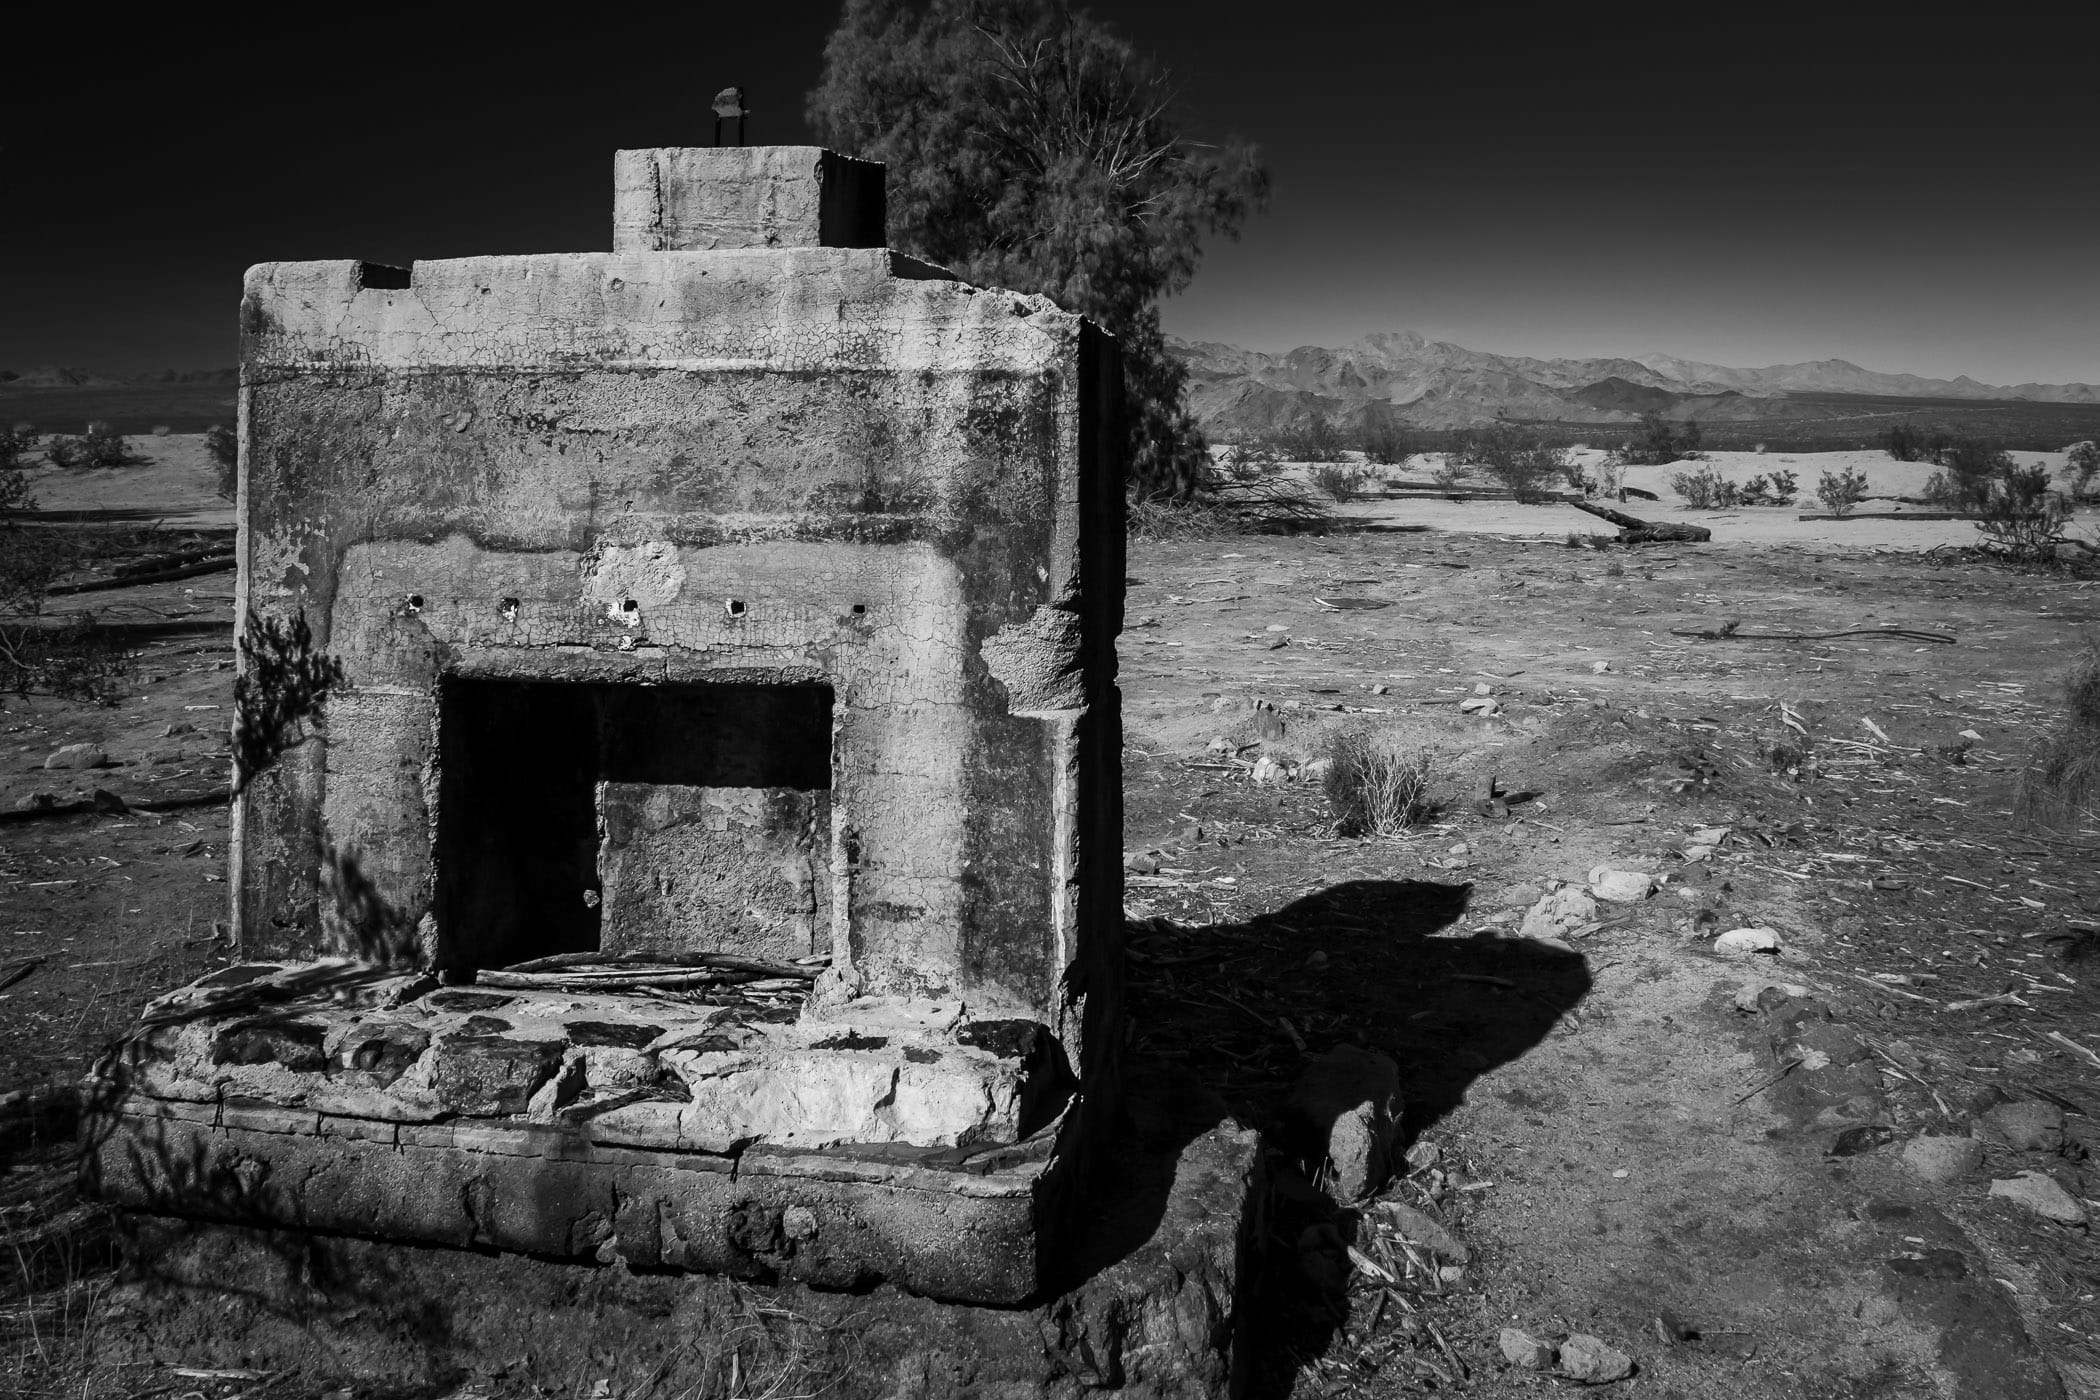 The remains of a fireplace in the desert at the ghost town of Kelso, California, deep in the desert of the Mojave National Preserve.